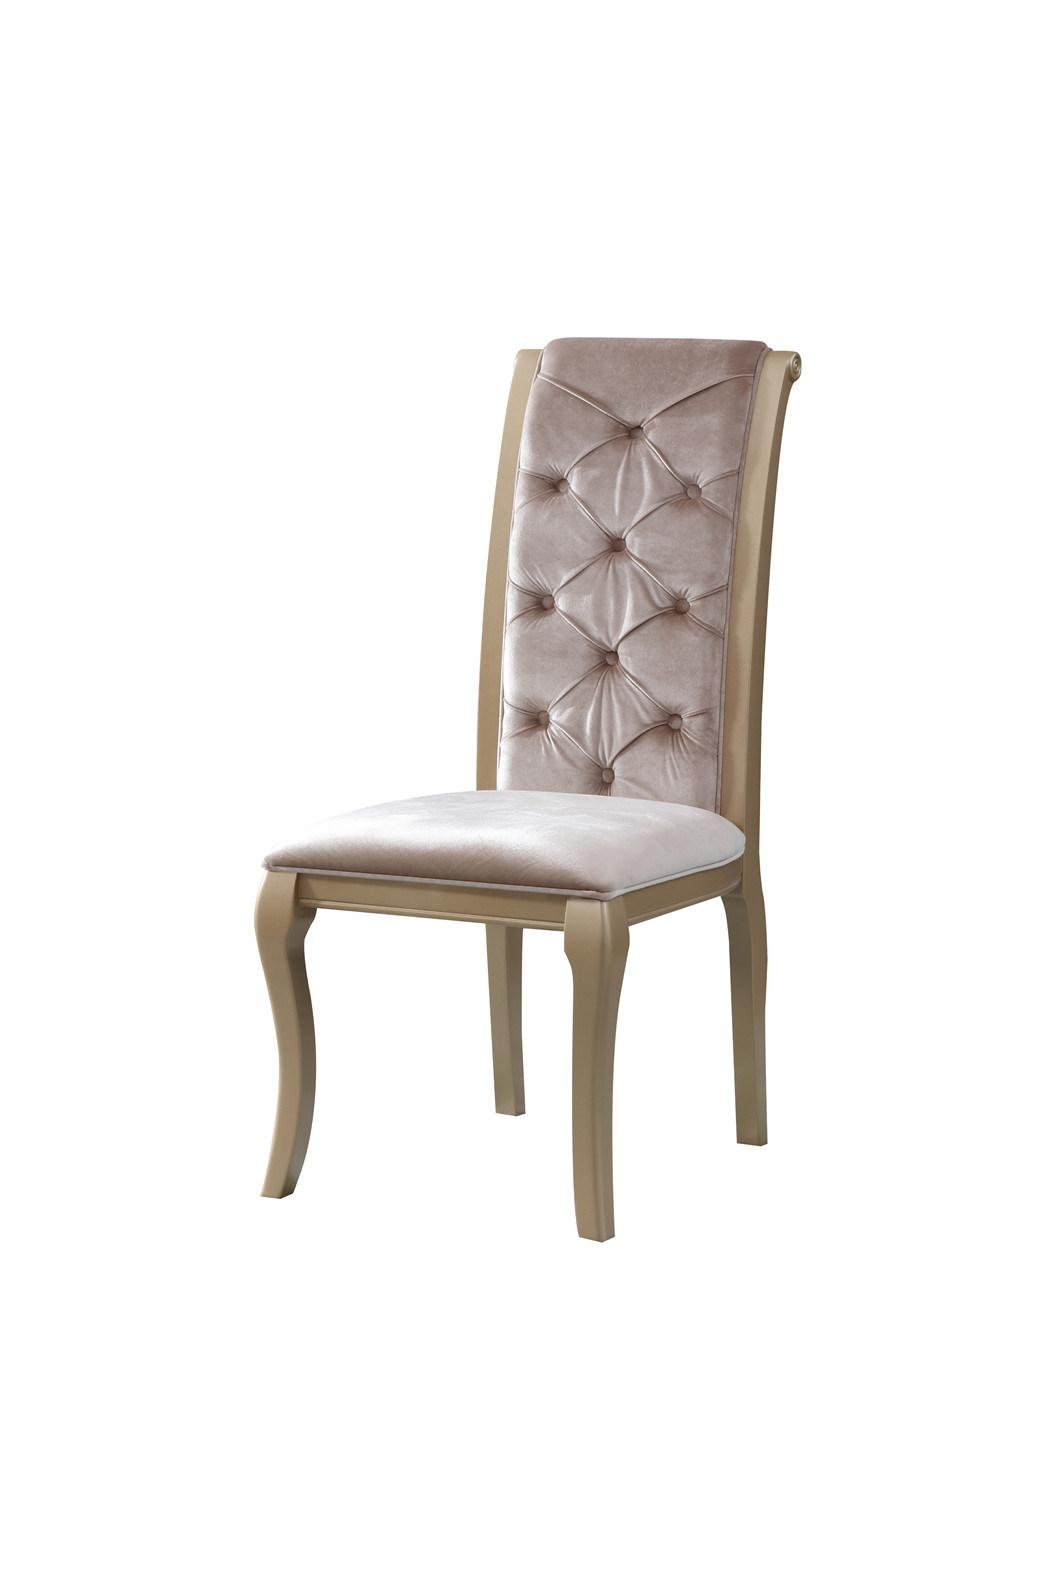 House Use Luxury and Wooden Style Dining Chair Room Furniture